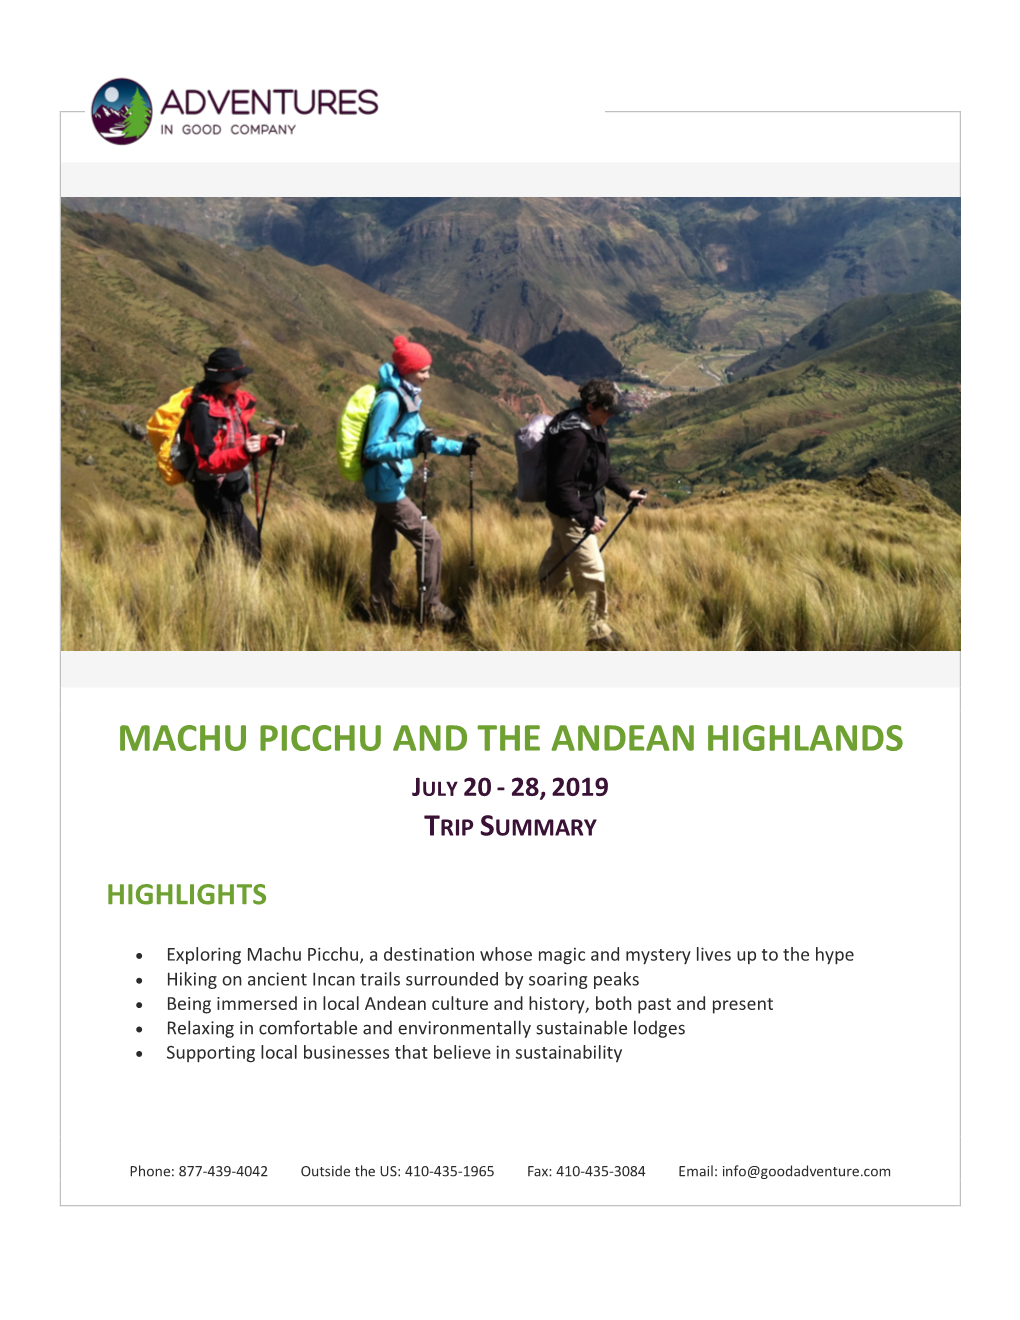 Machu Picchu and the Andean Highlands July 20 - 28, 2019 Trip Summary